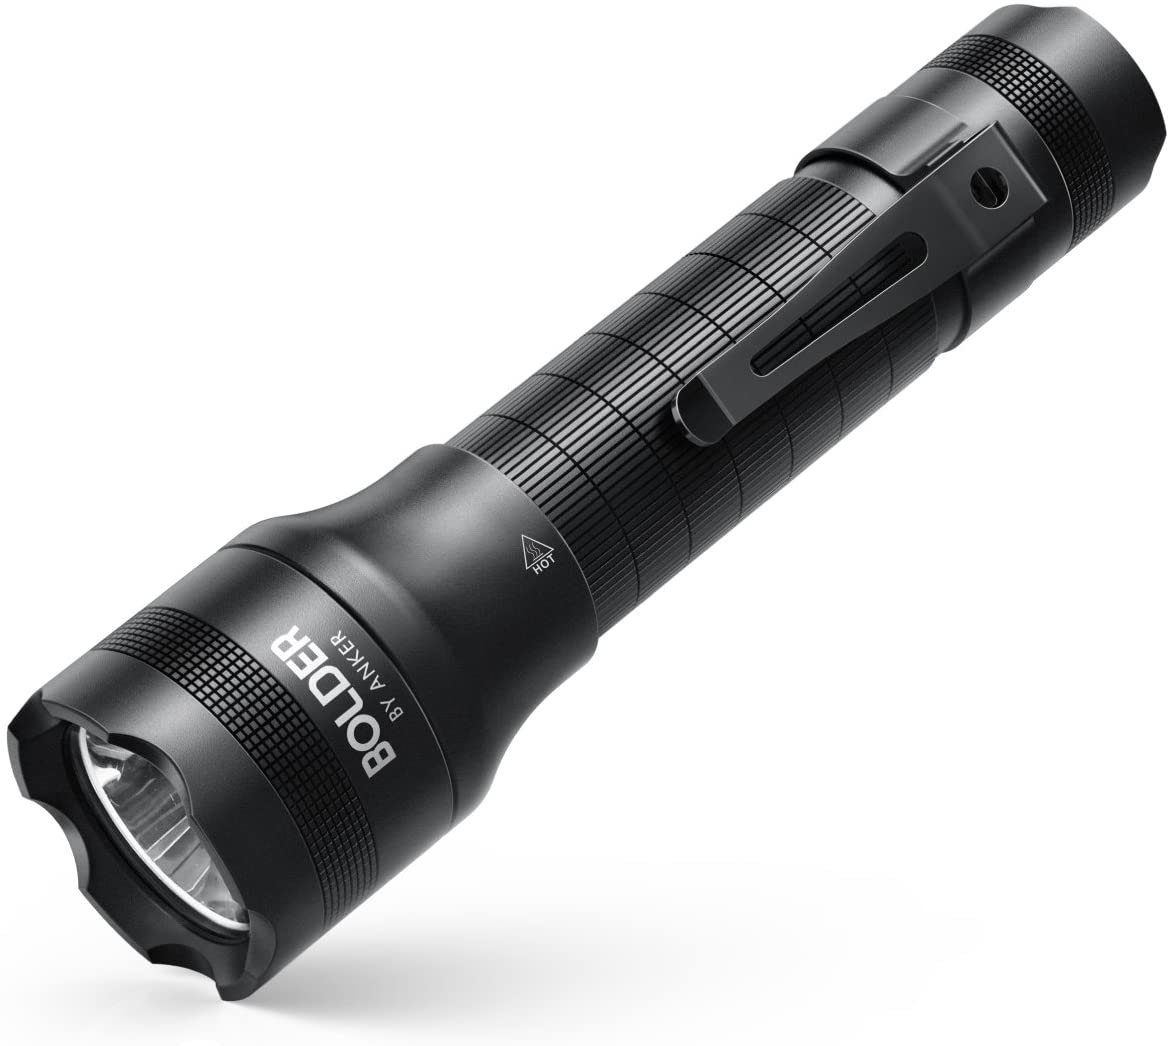 Amazon Prime Members: Anker Rechargeable Bolder LC40 Flashlight $17.99 + Free Shipping